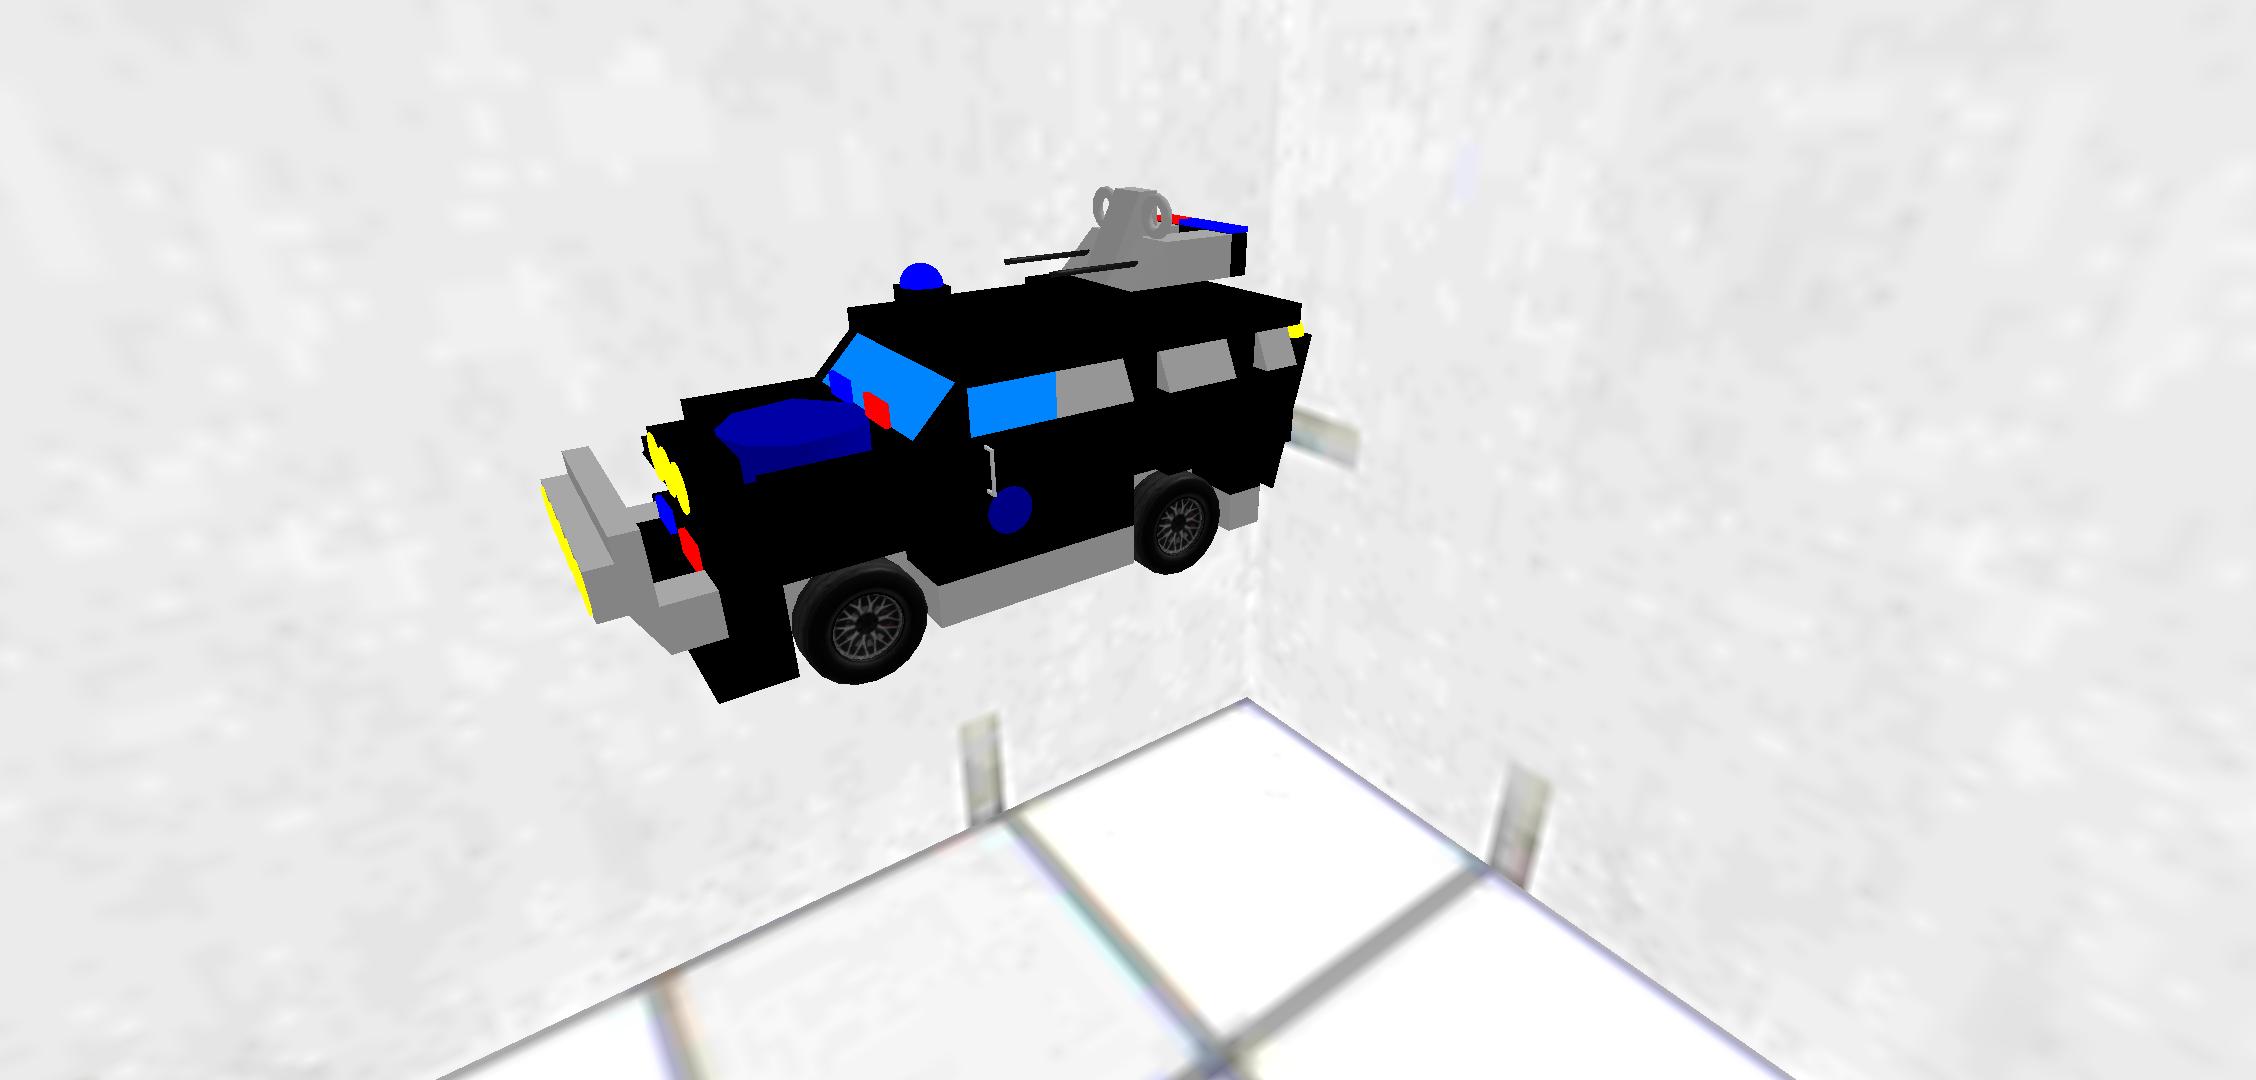 RS50 armored car